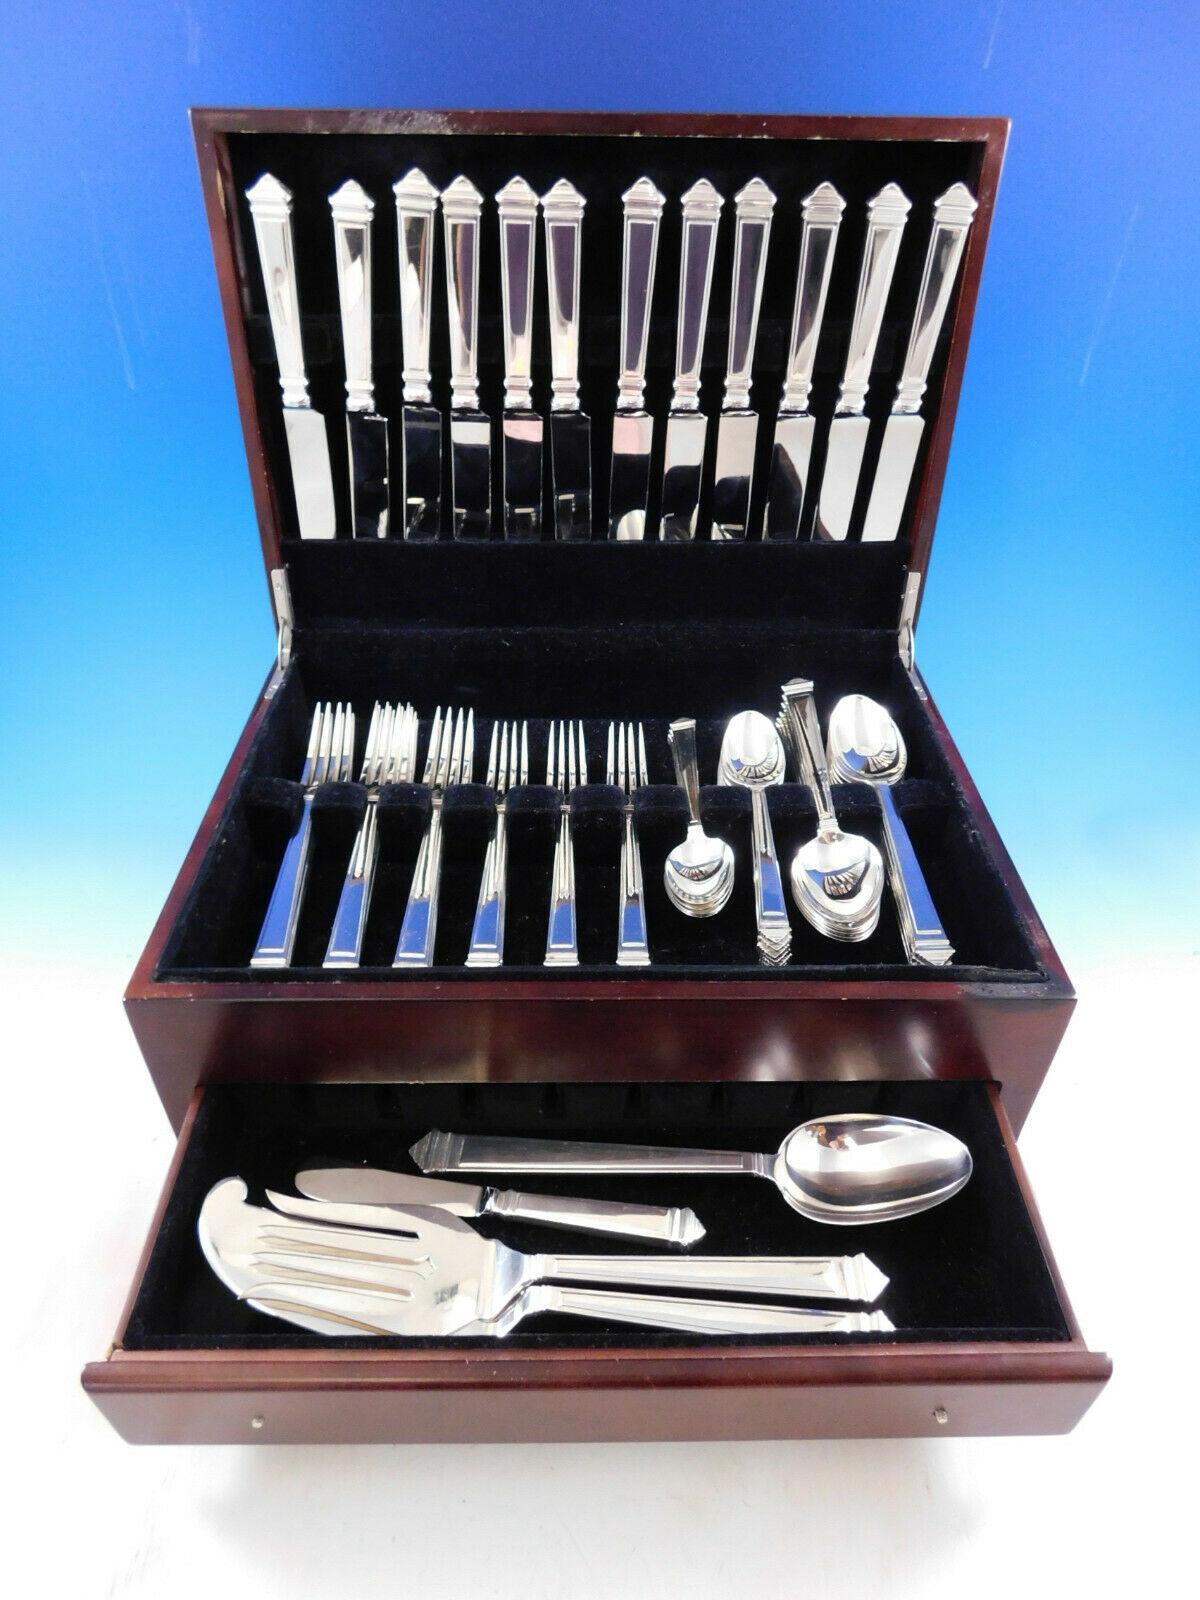 Dinner size legend by Fortunoff Italy sterling silver flatware set, 64 pieces. This pattern is reminiscent of Hampton by Tiffany. This set includes:

12 dinner knives, 9 1/2